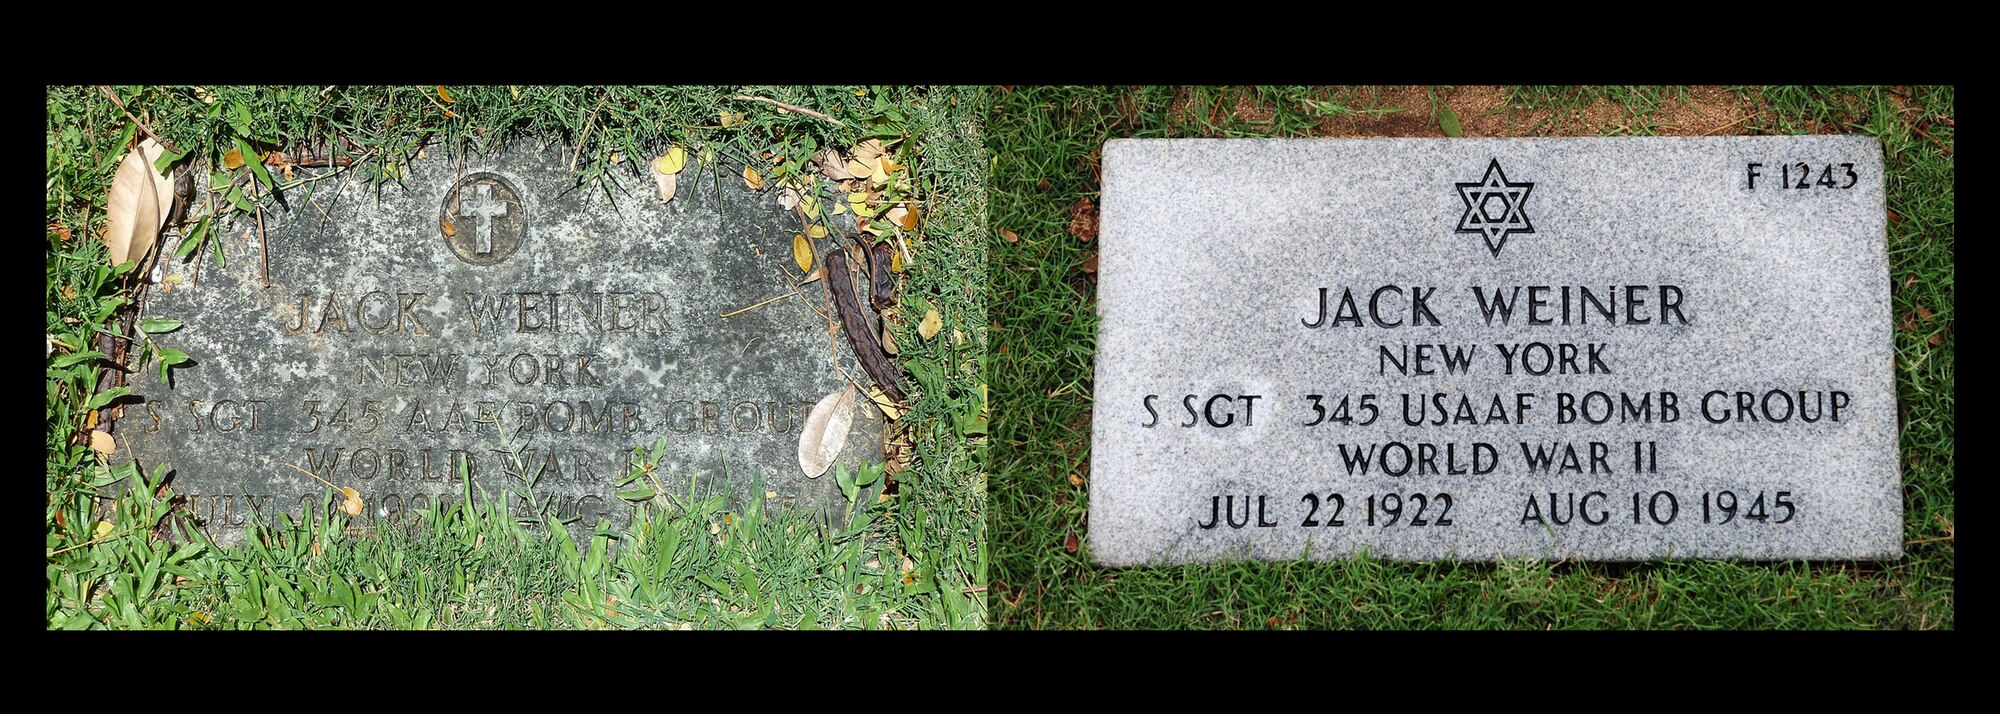 Photo illustration comparing Staff Sgt. Jack Weiner’s previous headstone and his corrected headstone. In 1949 Weiner was interred with the wrong religious symbol on his headstone. On Feb. 28, 2017, 1st Lt Levy Pekar, Rabbi Chaplain assigned to Nellis Air Force Base, Nev., led the headstone replacement ceremony at the National Memorial Cemetery of the Pacific, Honolulu, HI. (U.S. Air Force photo illustration by Tech. Sgt. Heather Redman)